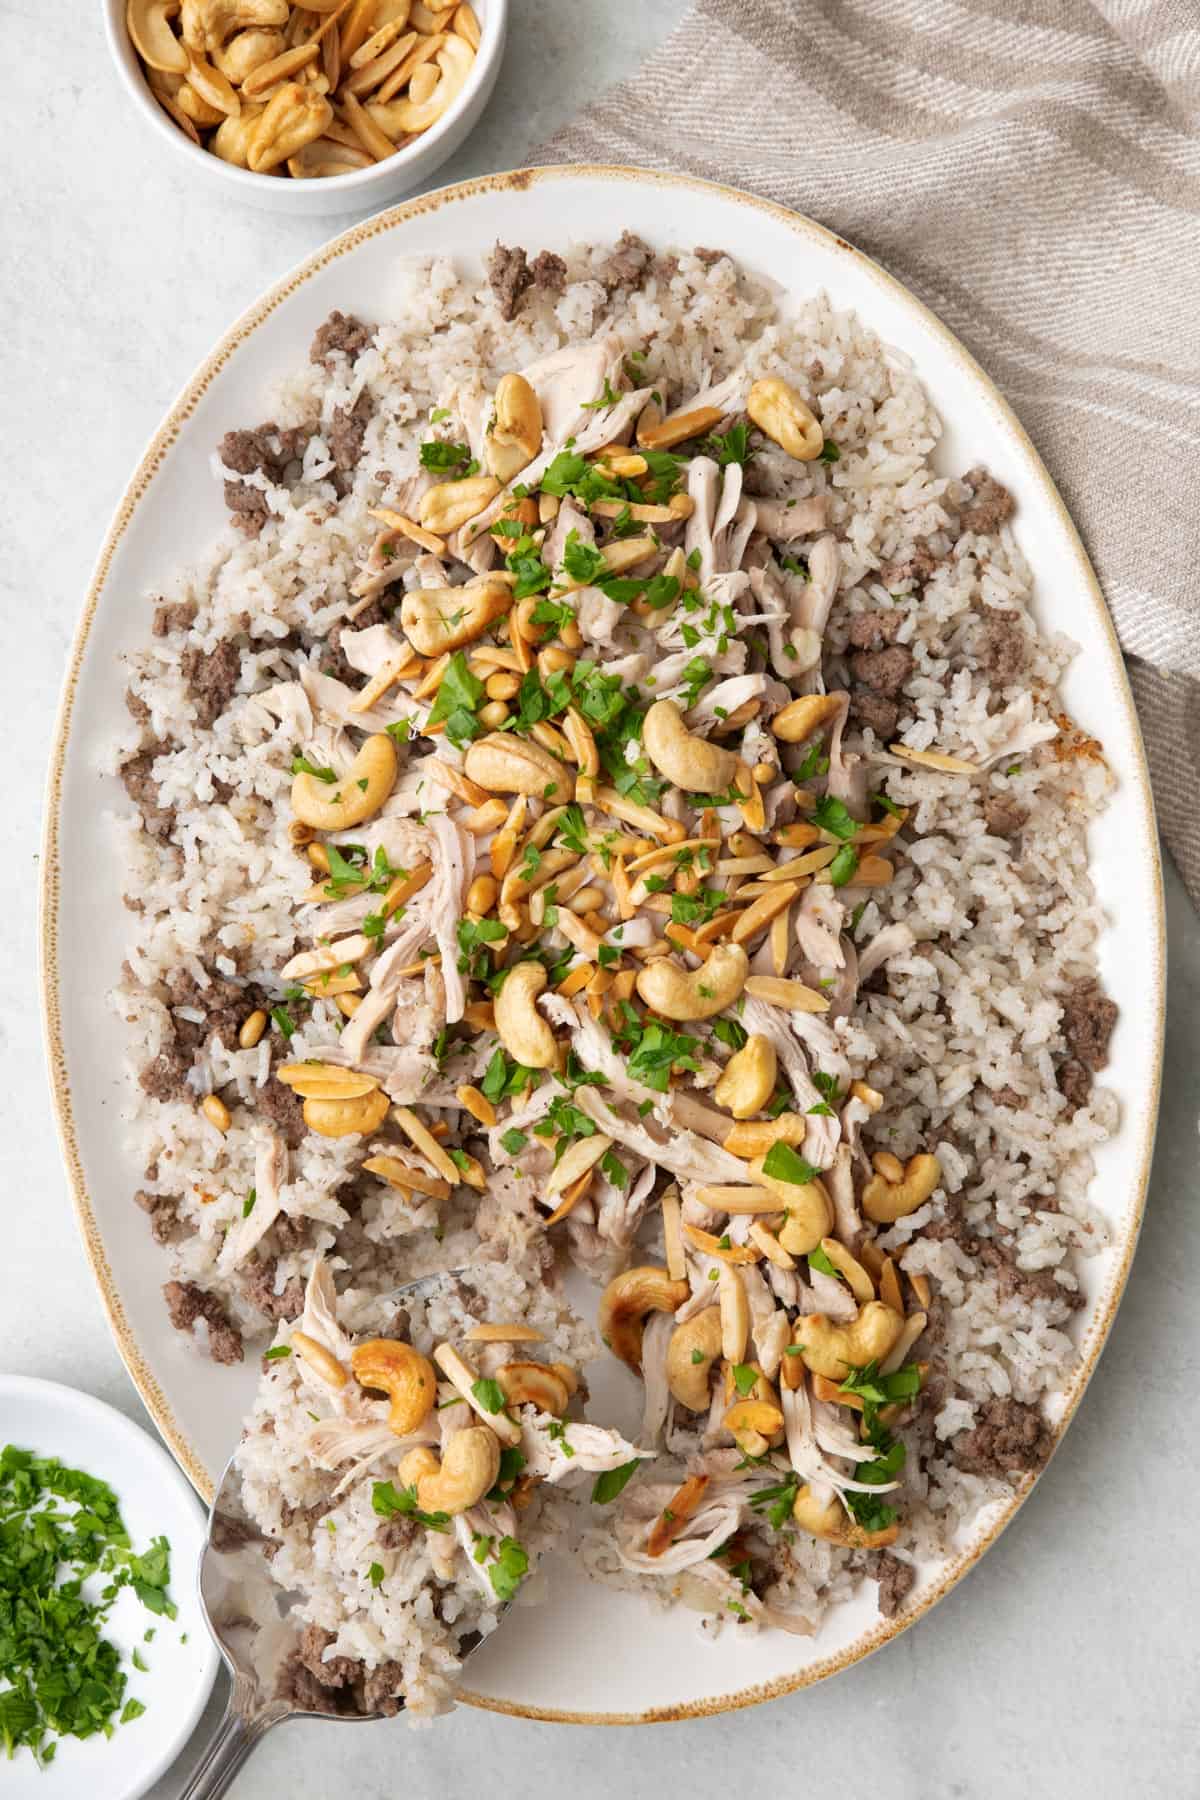 Spoon scooping up a serving of Lebanese chicken and rice topped with toasted nuts on a large oval platter and garnished with fresh parsley.